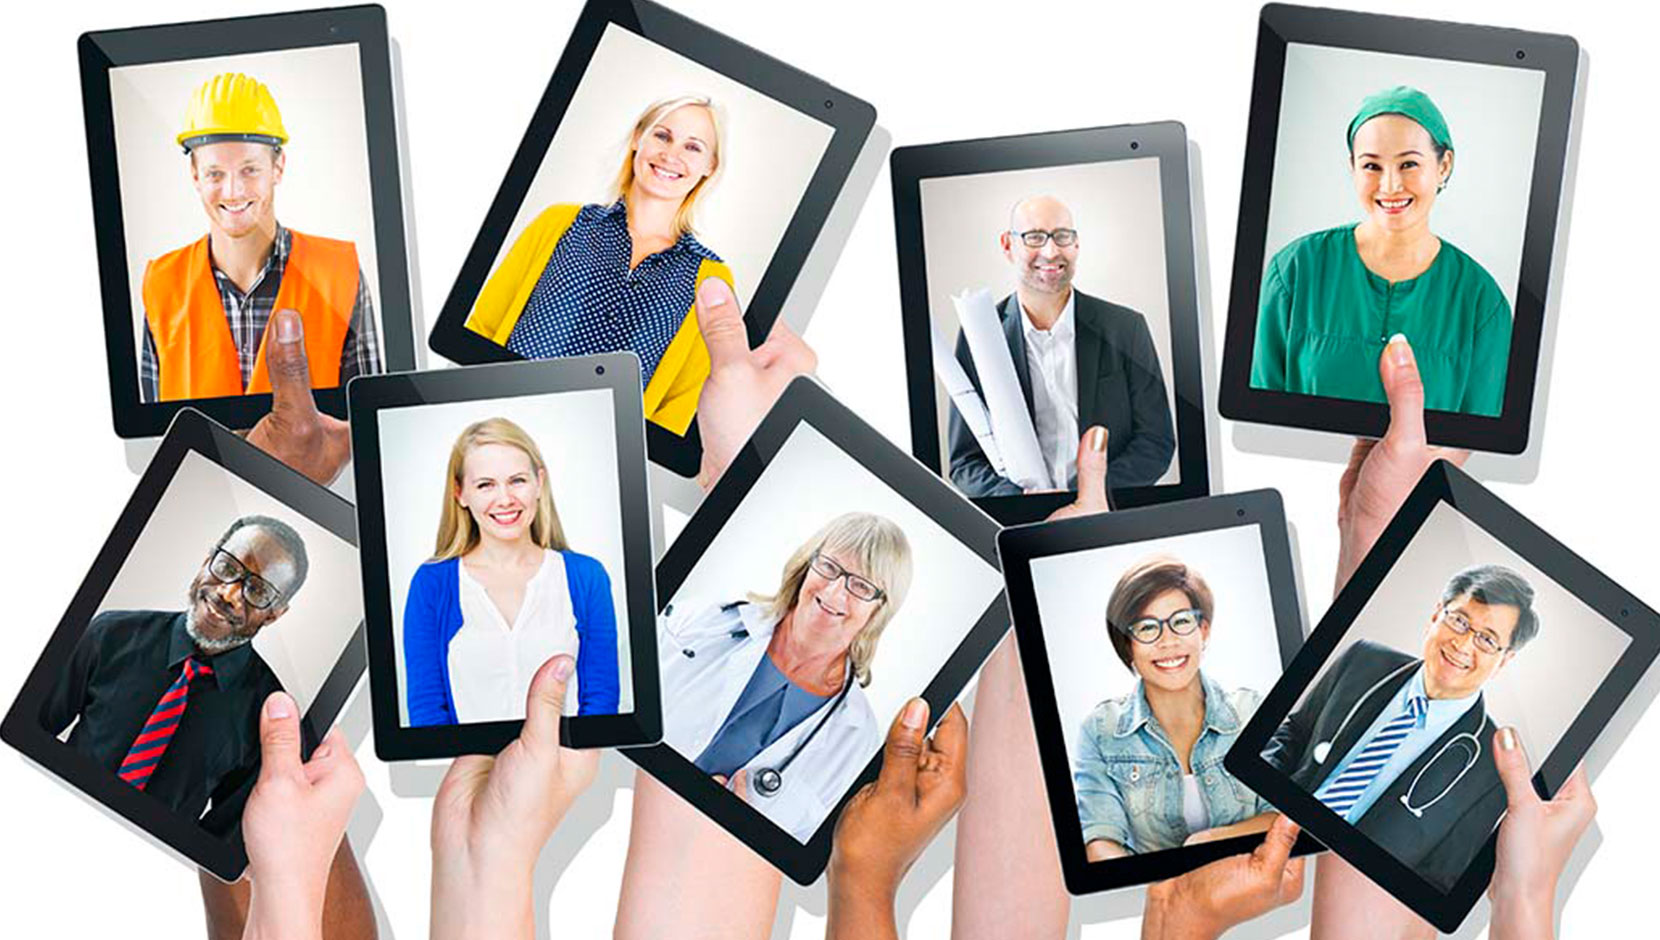 Stock image of a variety of hands holding photos of different employees in a variety of careers. Meant to represent job seeking/recruitment.